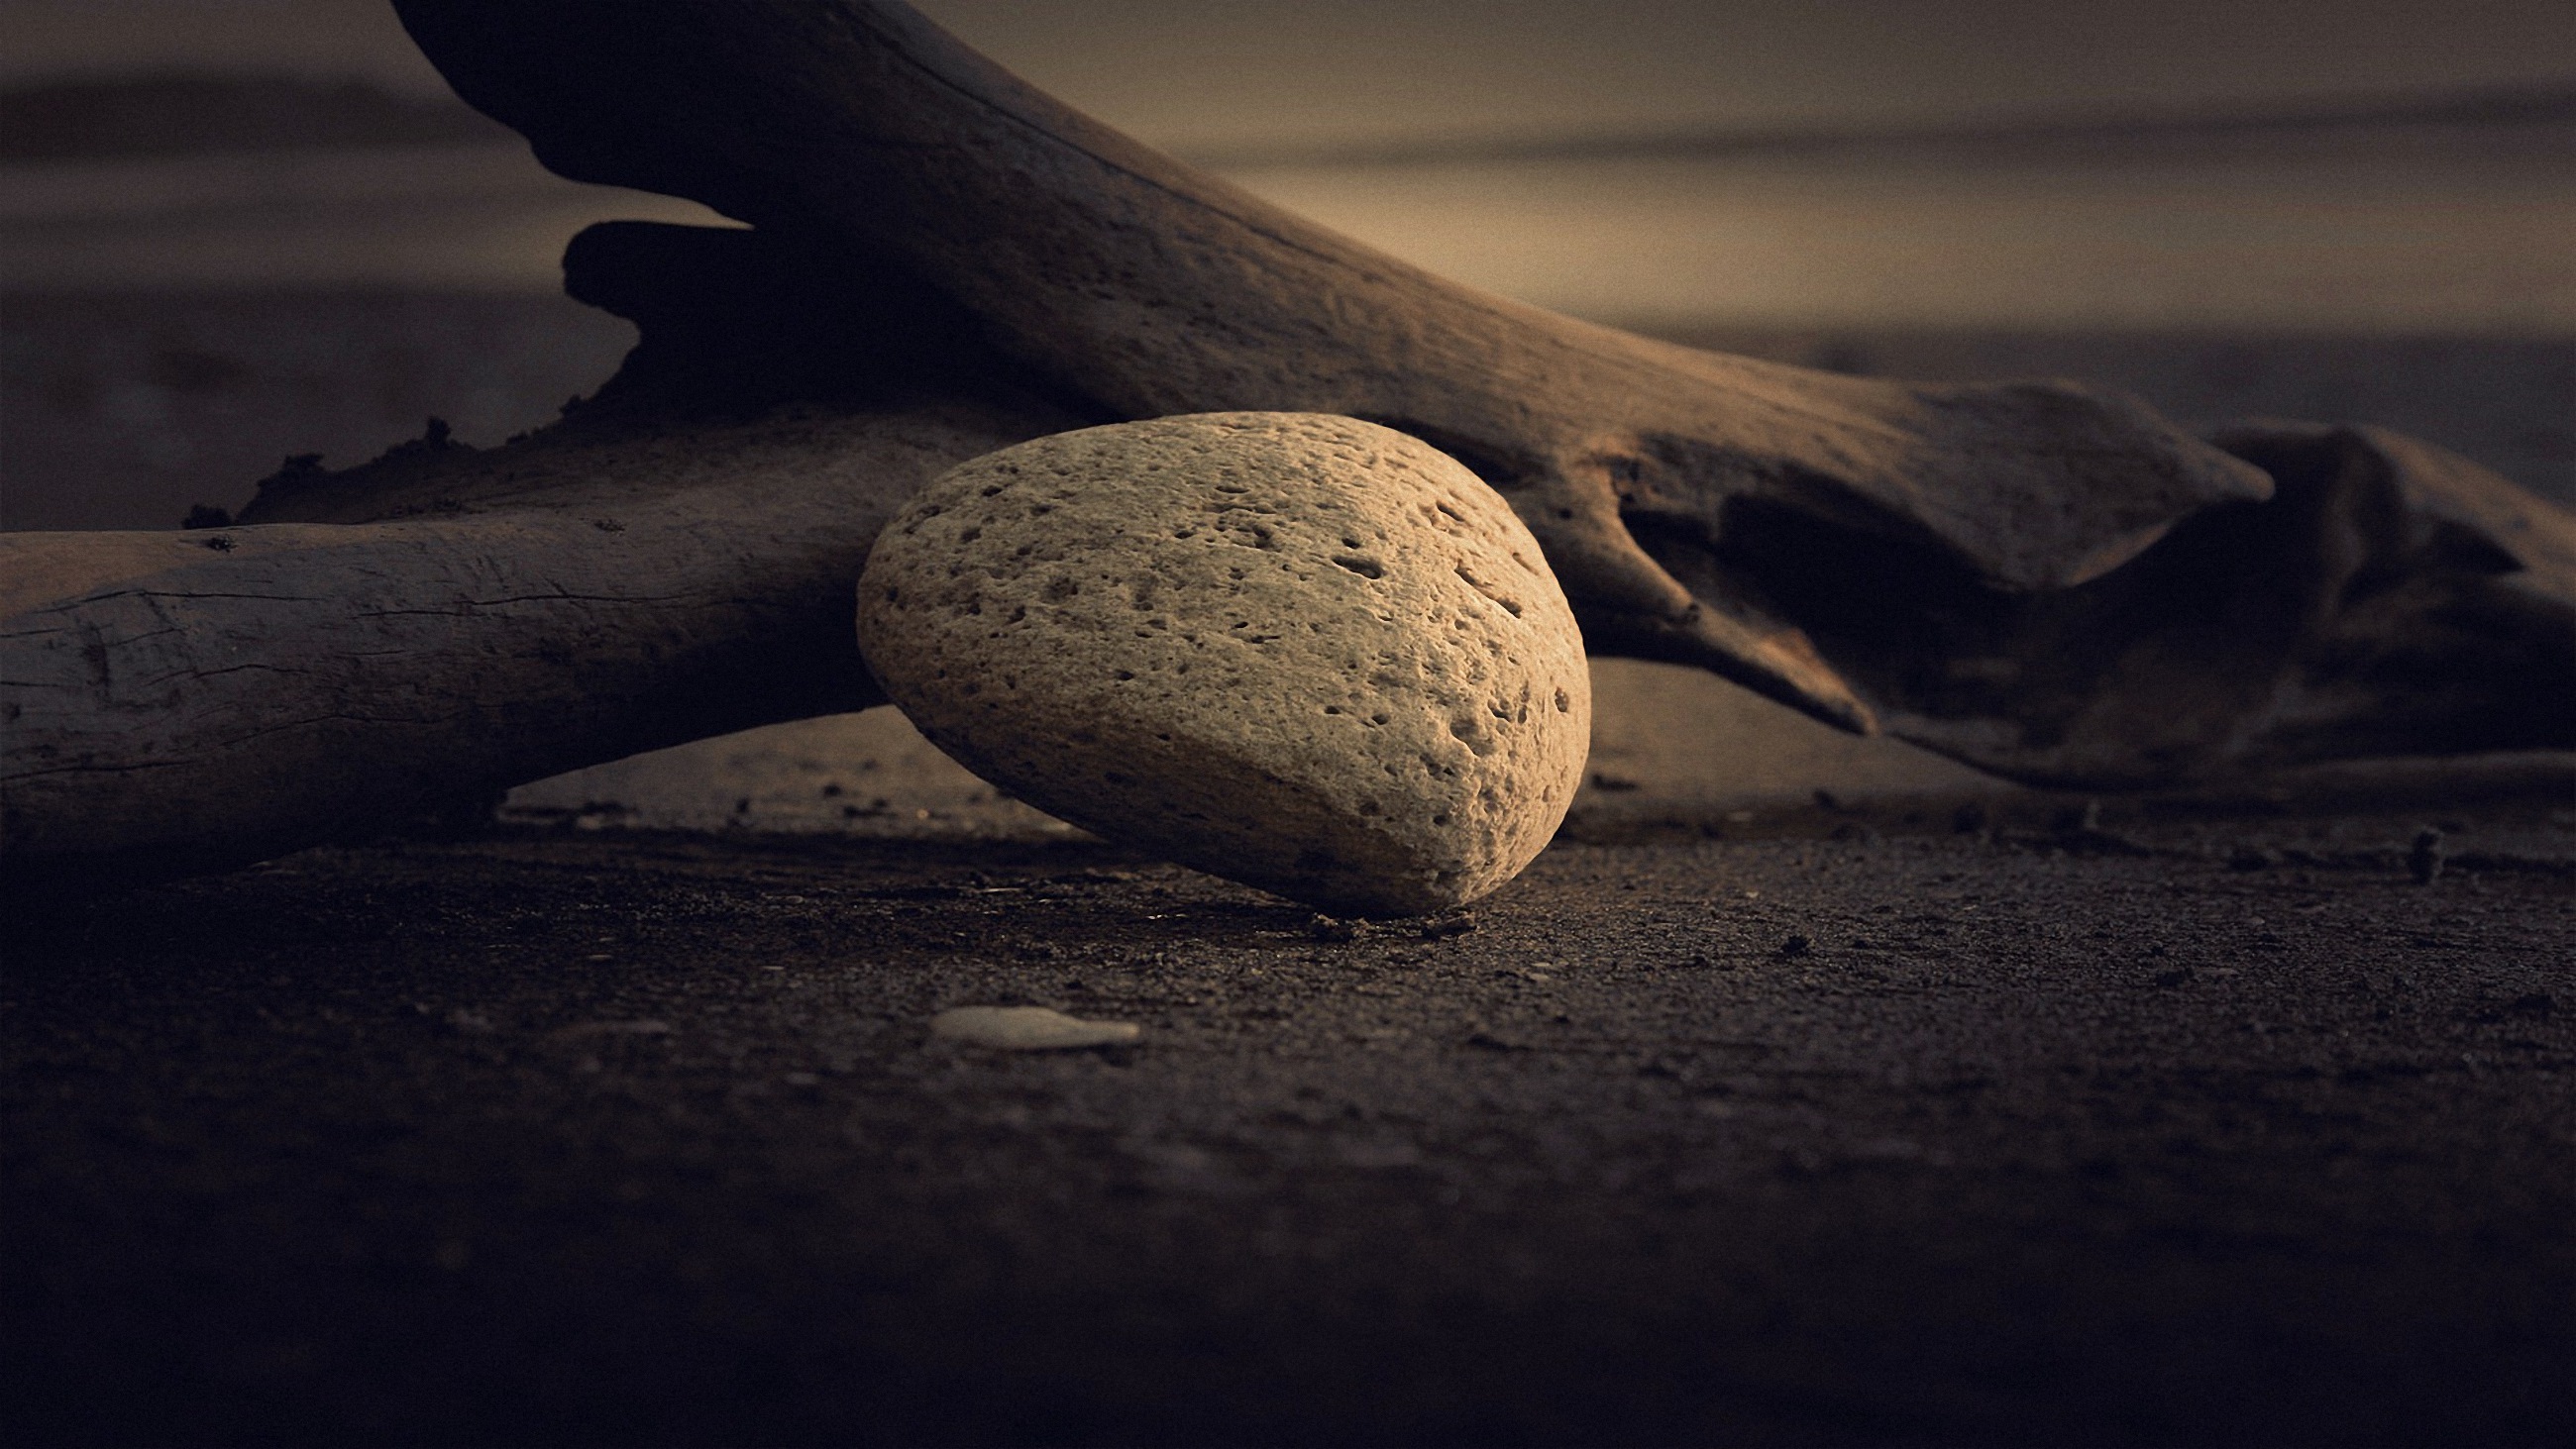 Cool Wallpapers nature, earth, rock, driftwood, sand, soil